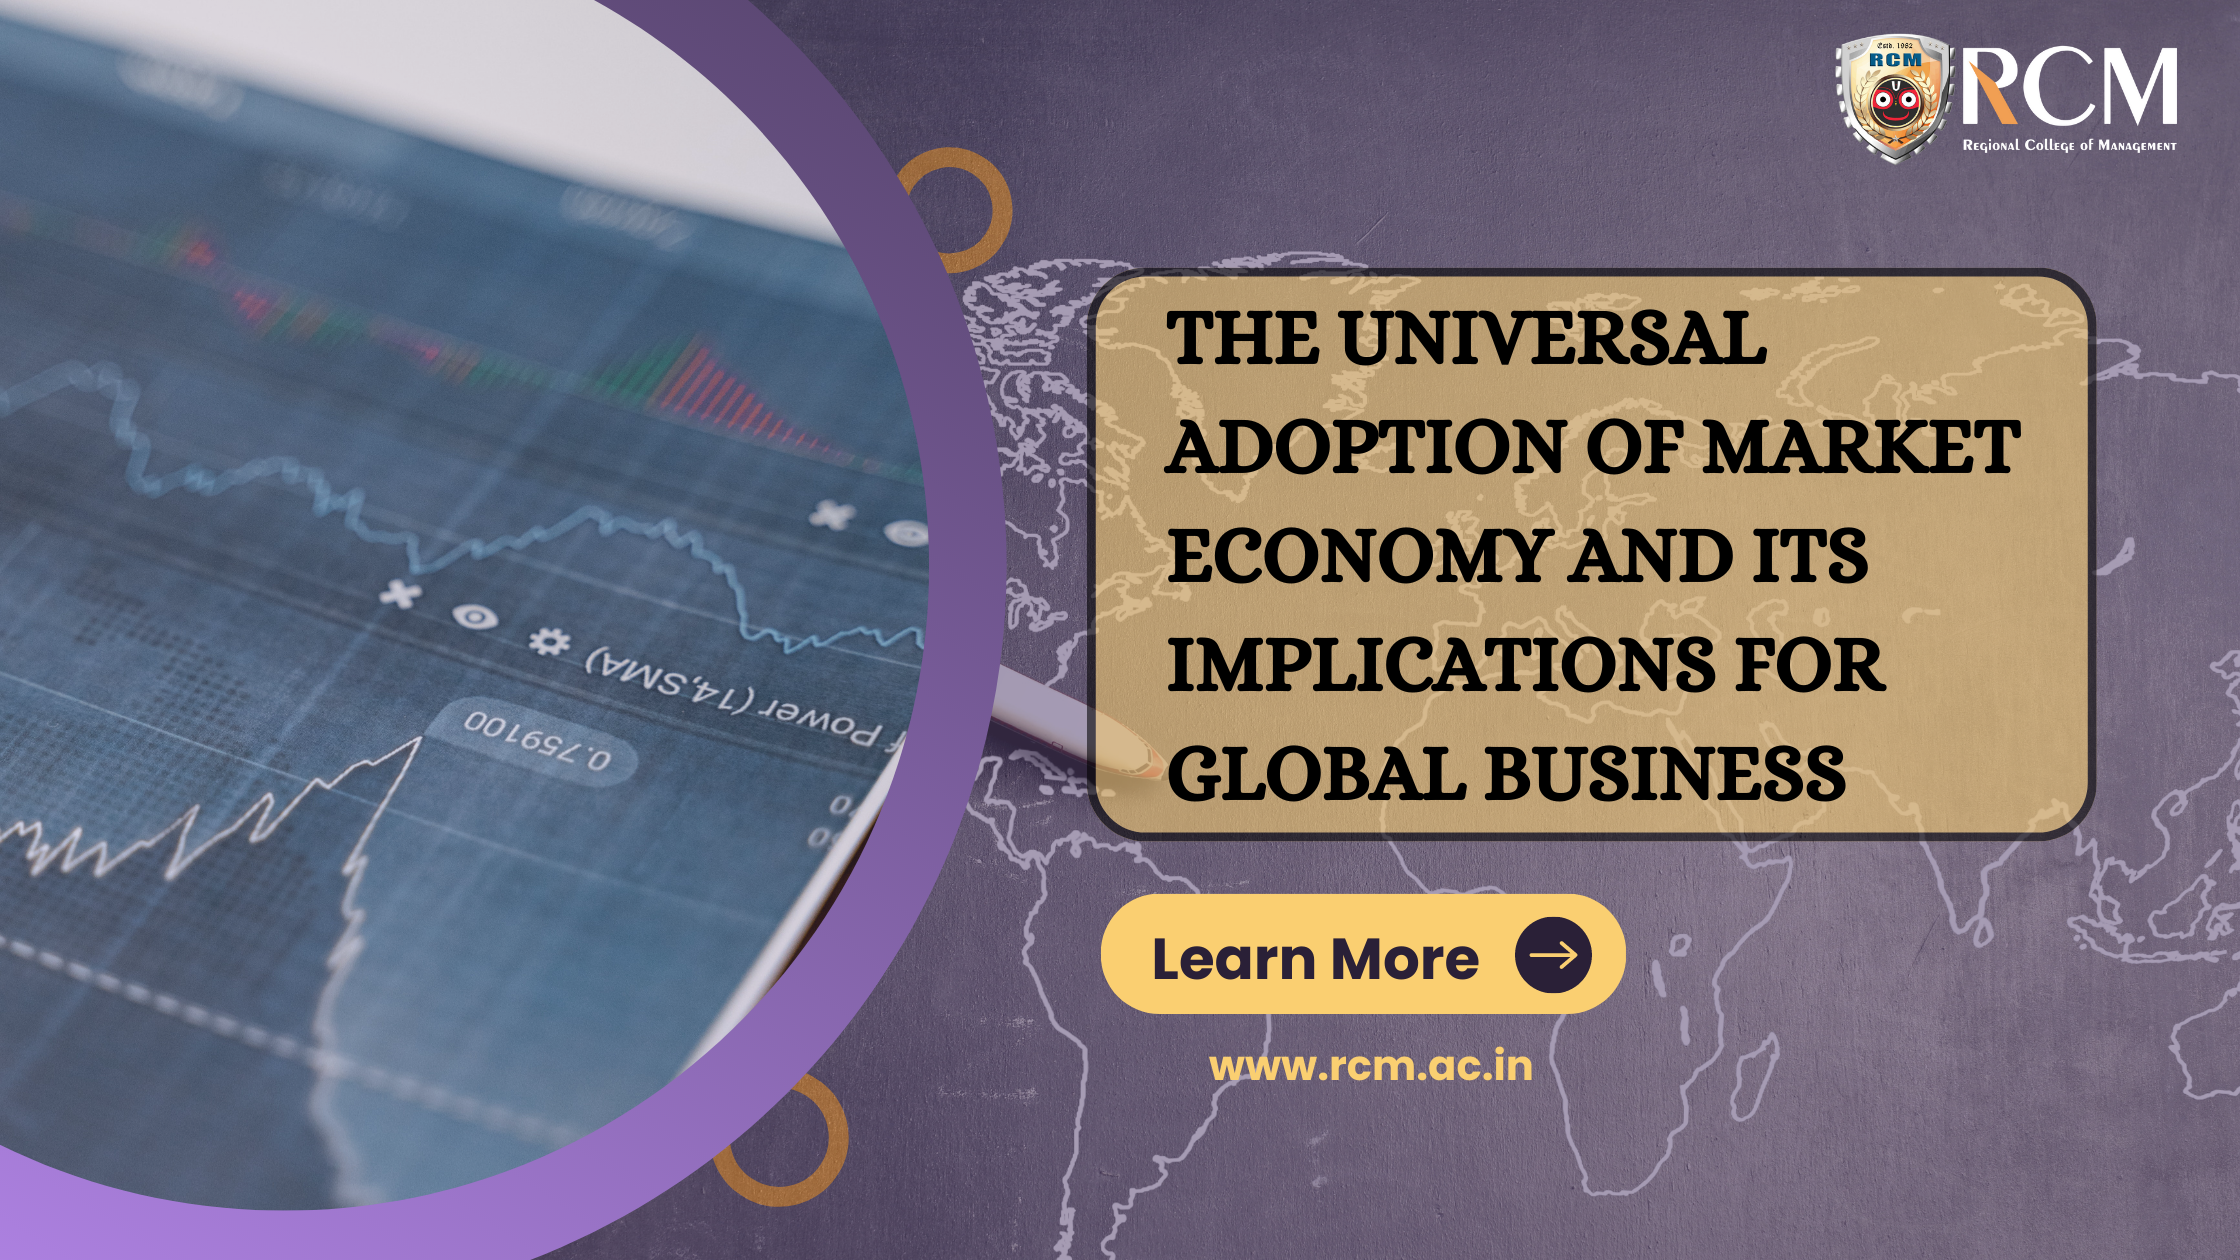 You are currently viewing The Universal Adoption of Market Economy and Its Implications for Global Business